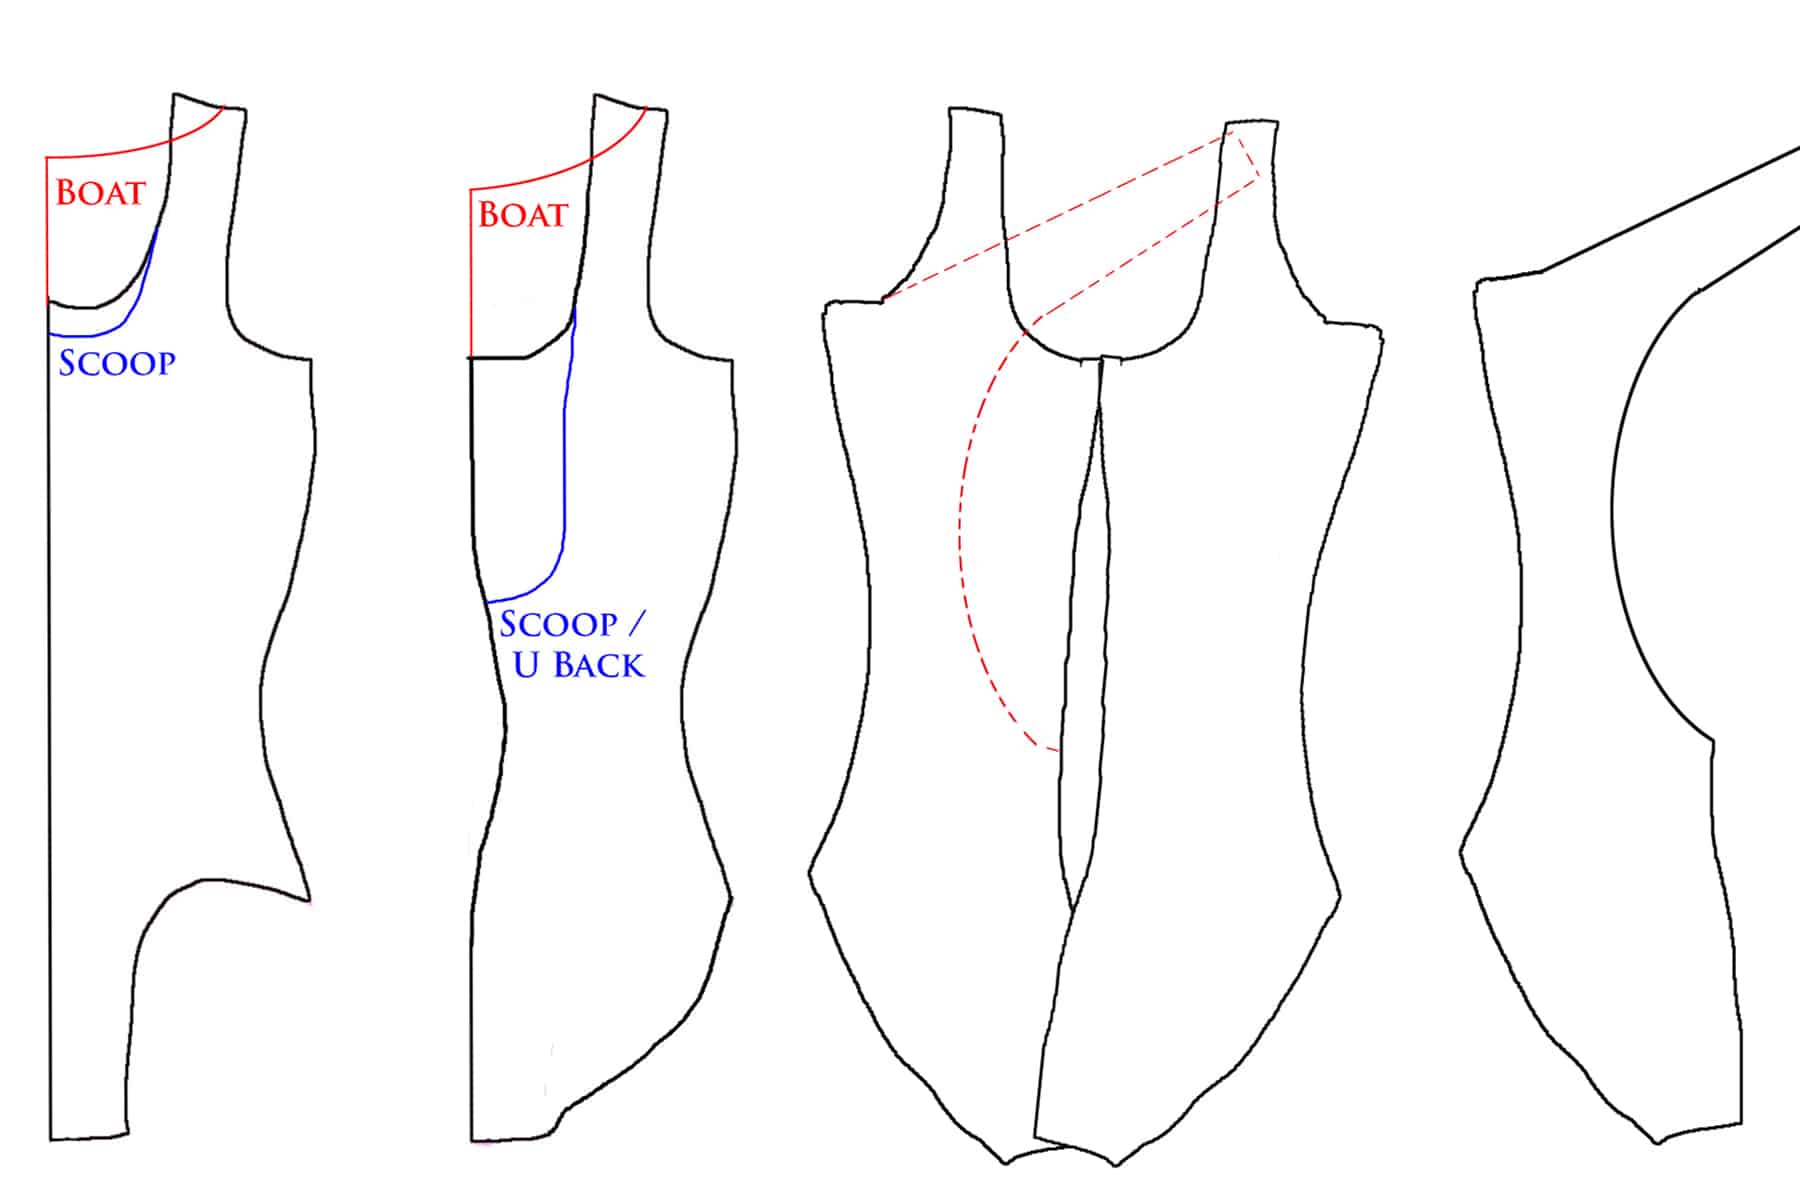 Several diagrams showing alterationsn being made to swimsuit patterns